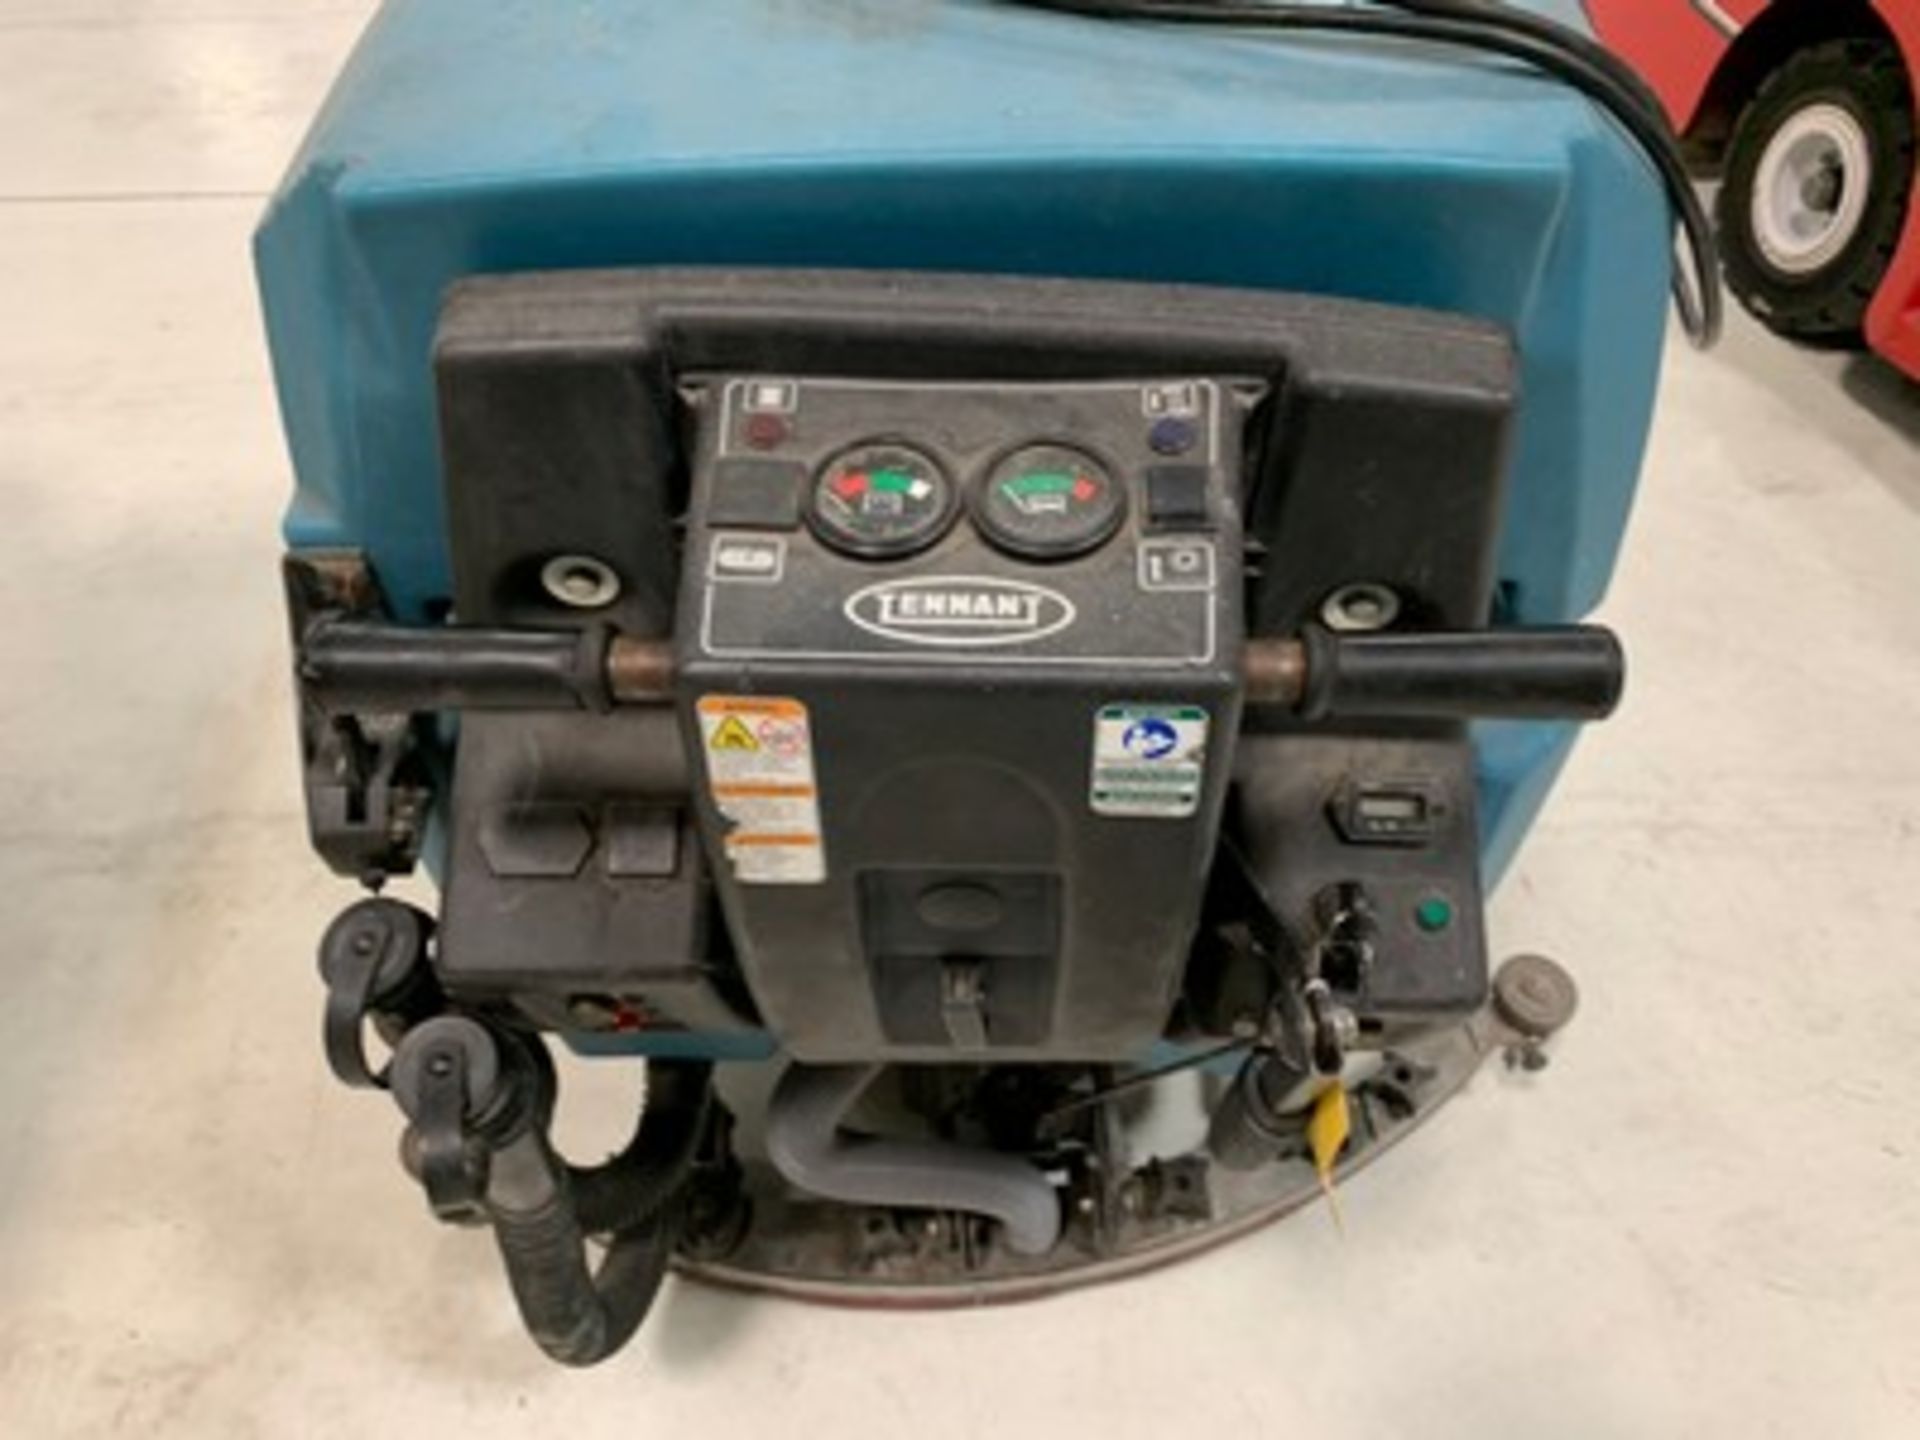 TENNANT 5700 FLOOR CLEANER WITH 36V CHARGER - Image 2 of 4